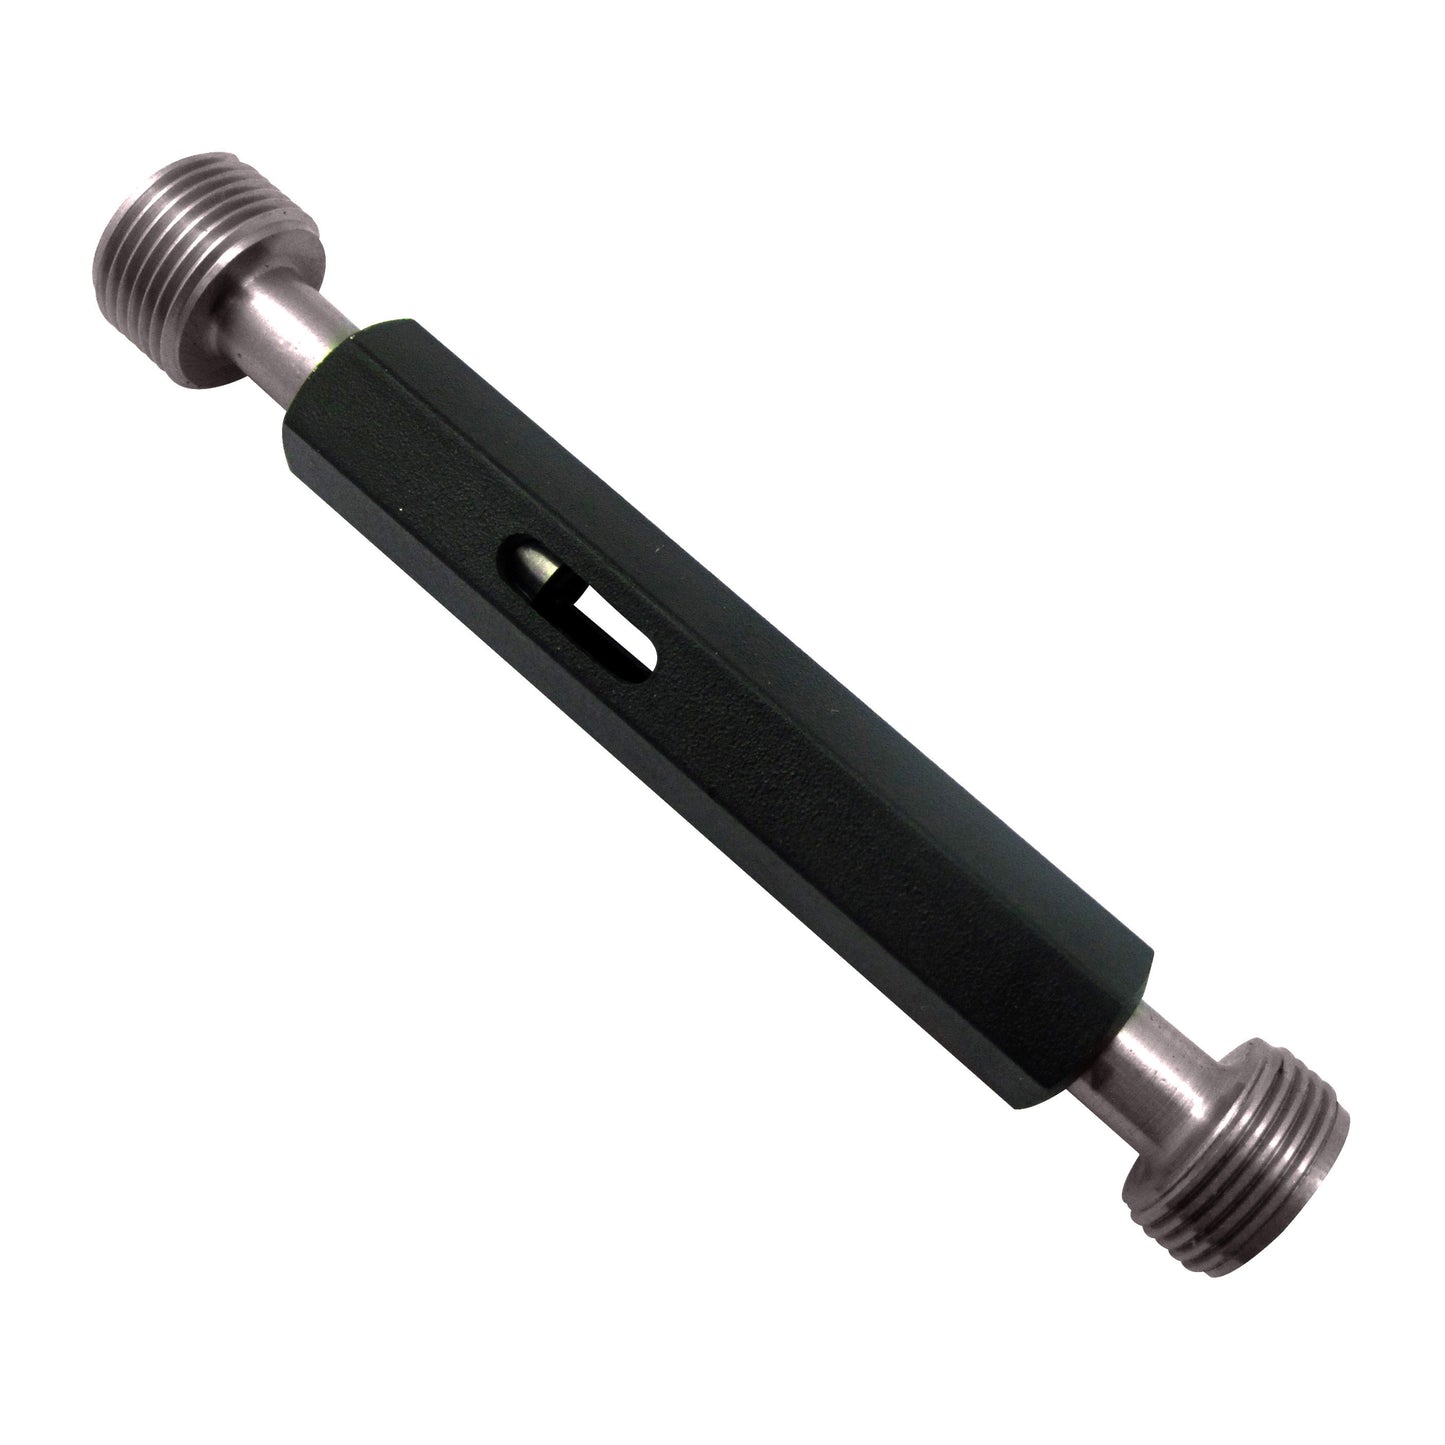 3/4" - 20 Unified Right Hand Thread Plug Gauge